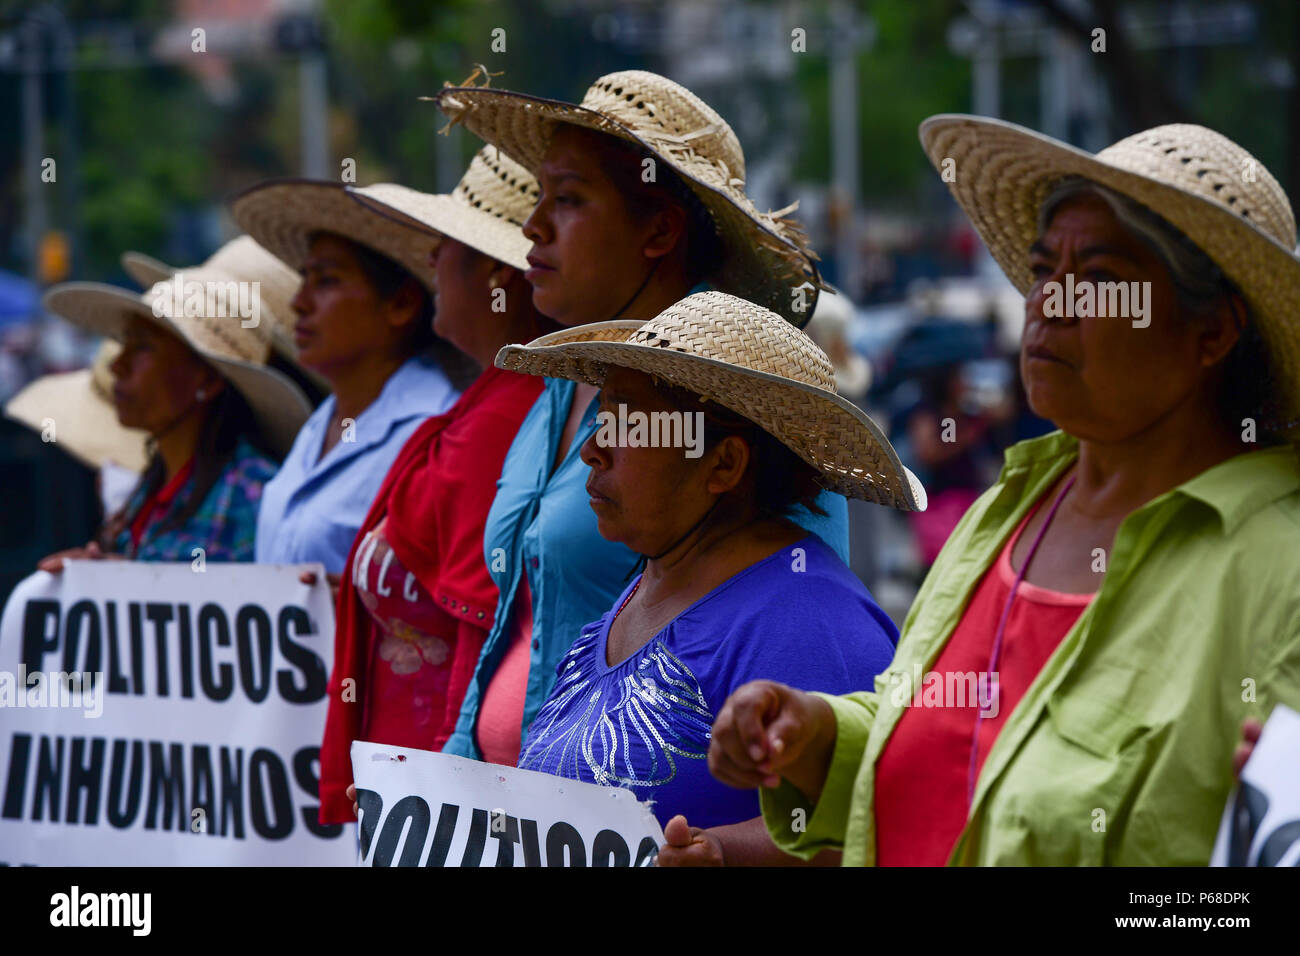 Mexico, Ciudad de Mexico, Mexico. 28th June, 2018. Women members of the 400 pueblos from Veracruz, Mexico keep their protest of more then 20 years against the current Governor of the state of Veracruz, Miguel Angel Yunes, whom they accuse to keep jailed more then 69 male members of their organization, including their lider Cesar Angel Fuentes. The Governor accuses the 400 pueblos of invading illegally a 1200 hectares plot of land in the Chichihuaxtla town in Tihuatlan county, Veracruz. Mexico is holding presidential, gubernatorial, federal and local congress elections, July 1st. (Credit Imag Stock Photo